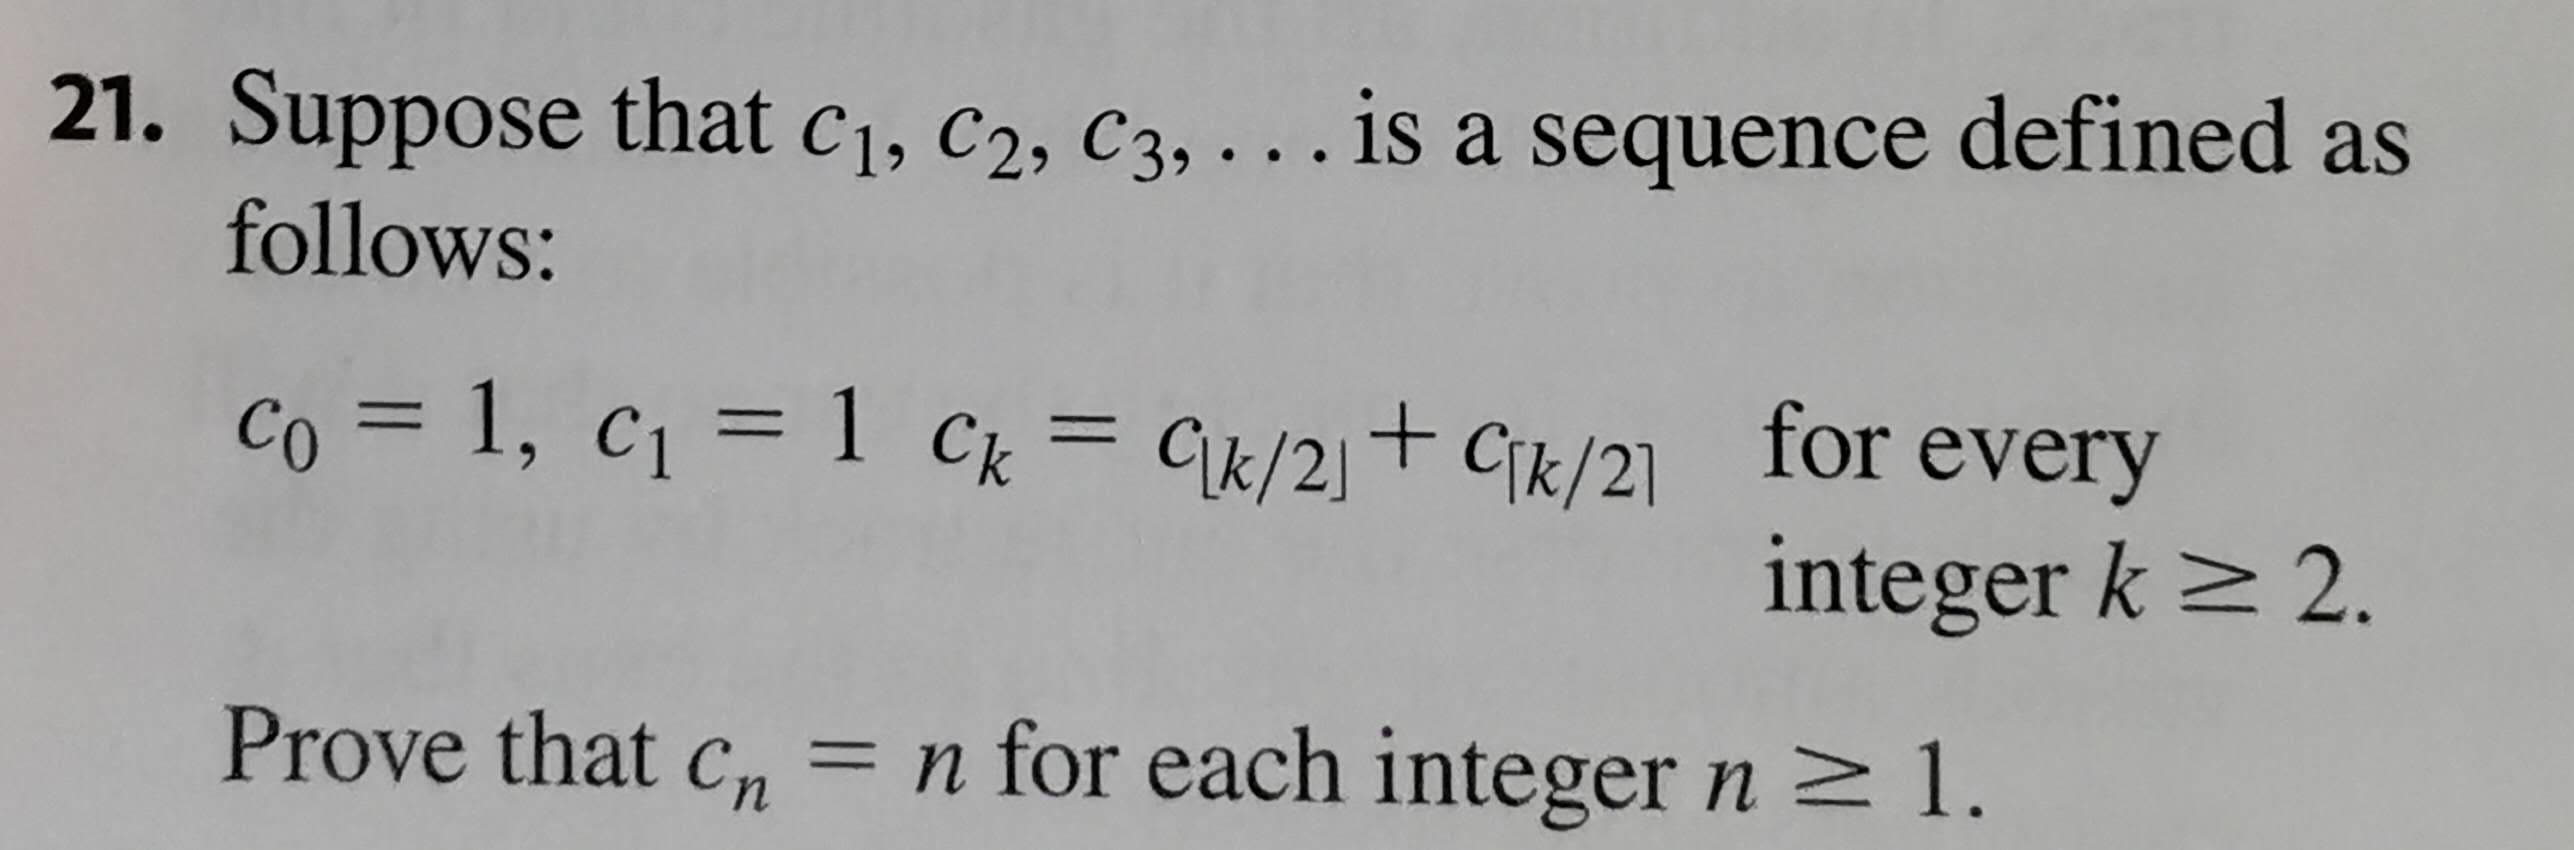 21. Suppose that c1, c2, C3, ... is a sequence defined as
follows:
co = 1, c1 = 1 Ck = Gk/2]+ Cjk/2]
for every
%|
integer k> 2.
Prove that c, =
n for each integer n 1.
